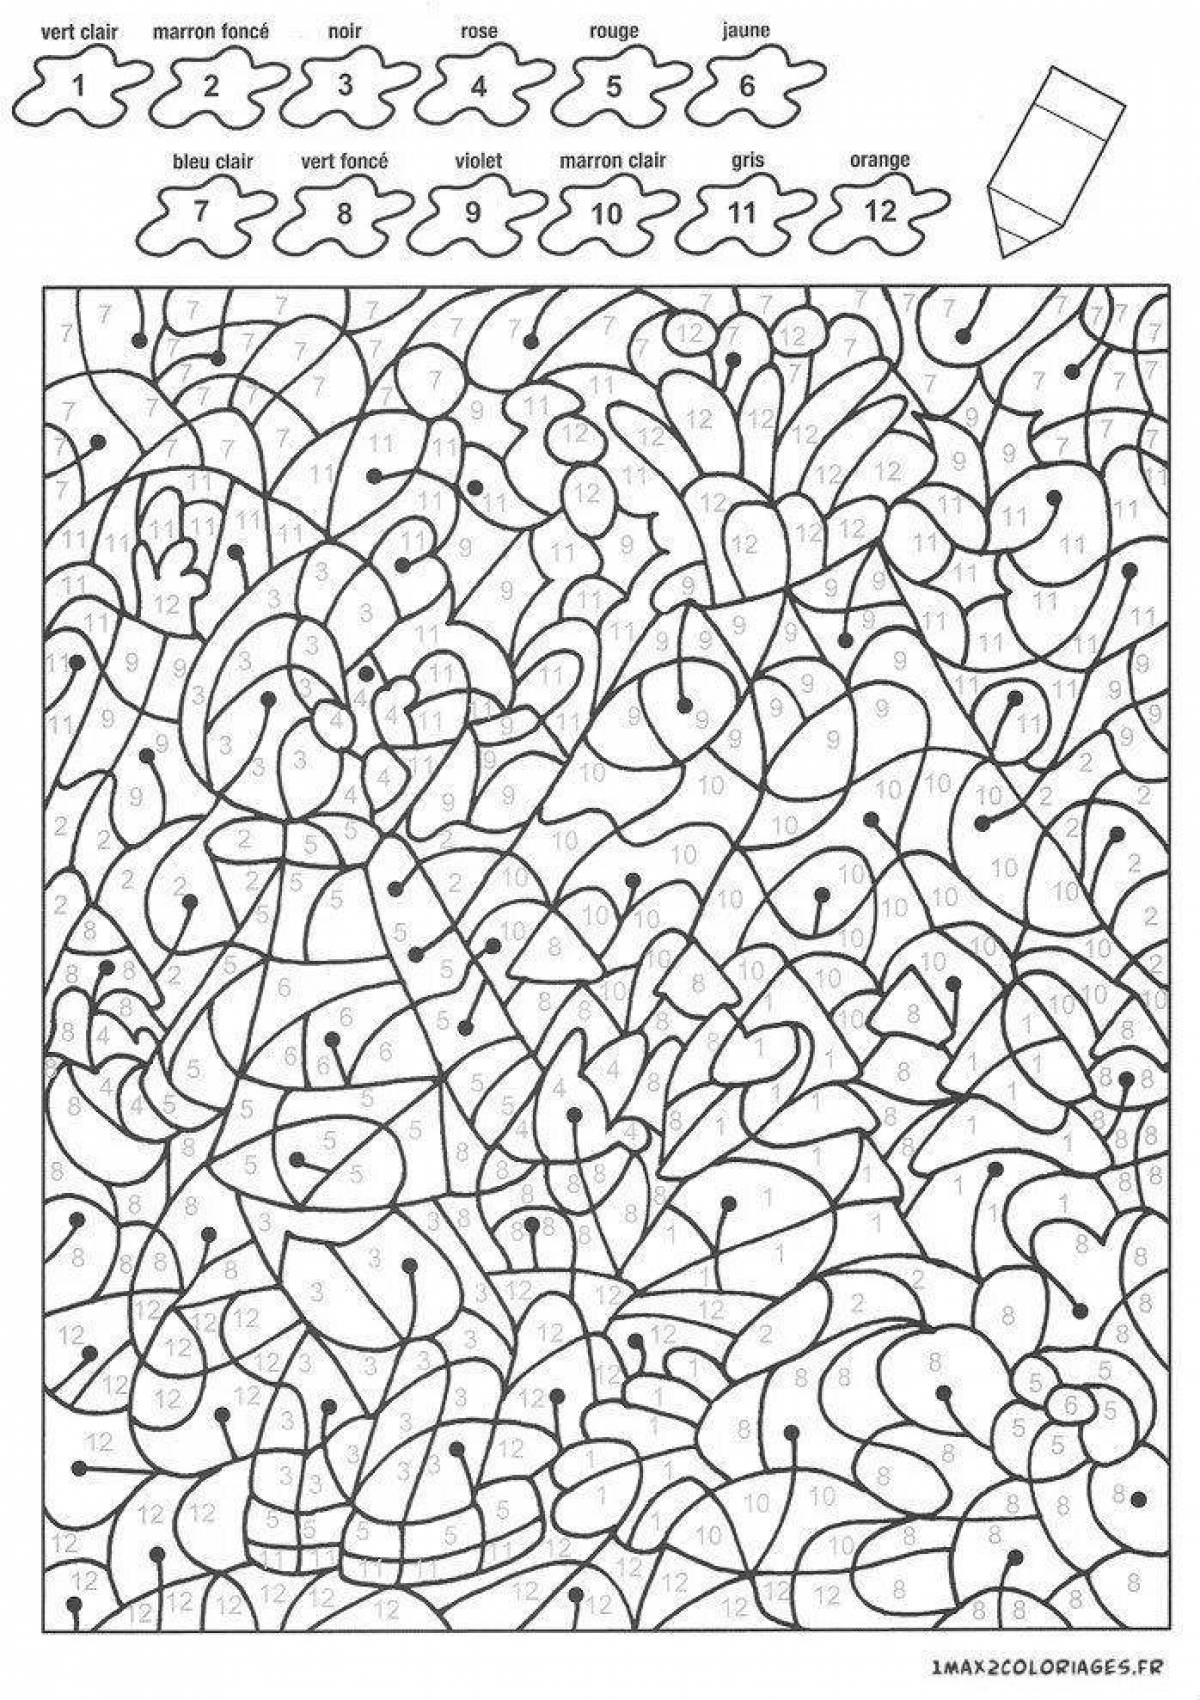 Funny smeshariki coloring pages